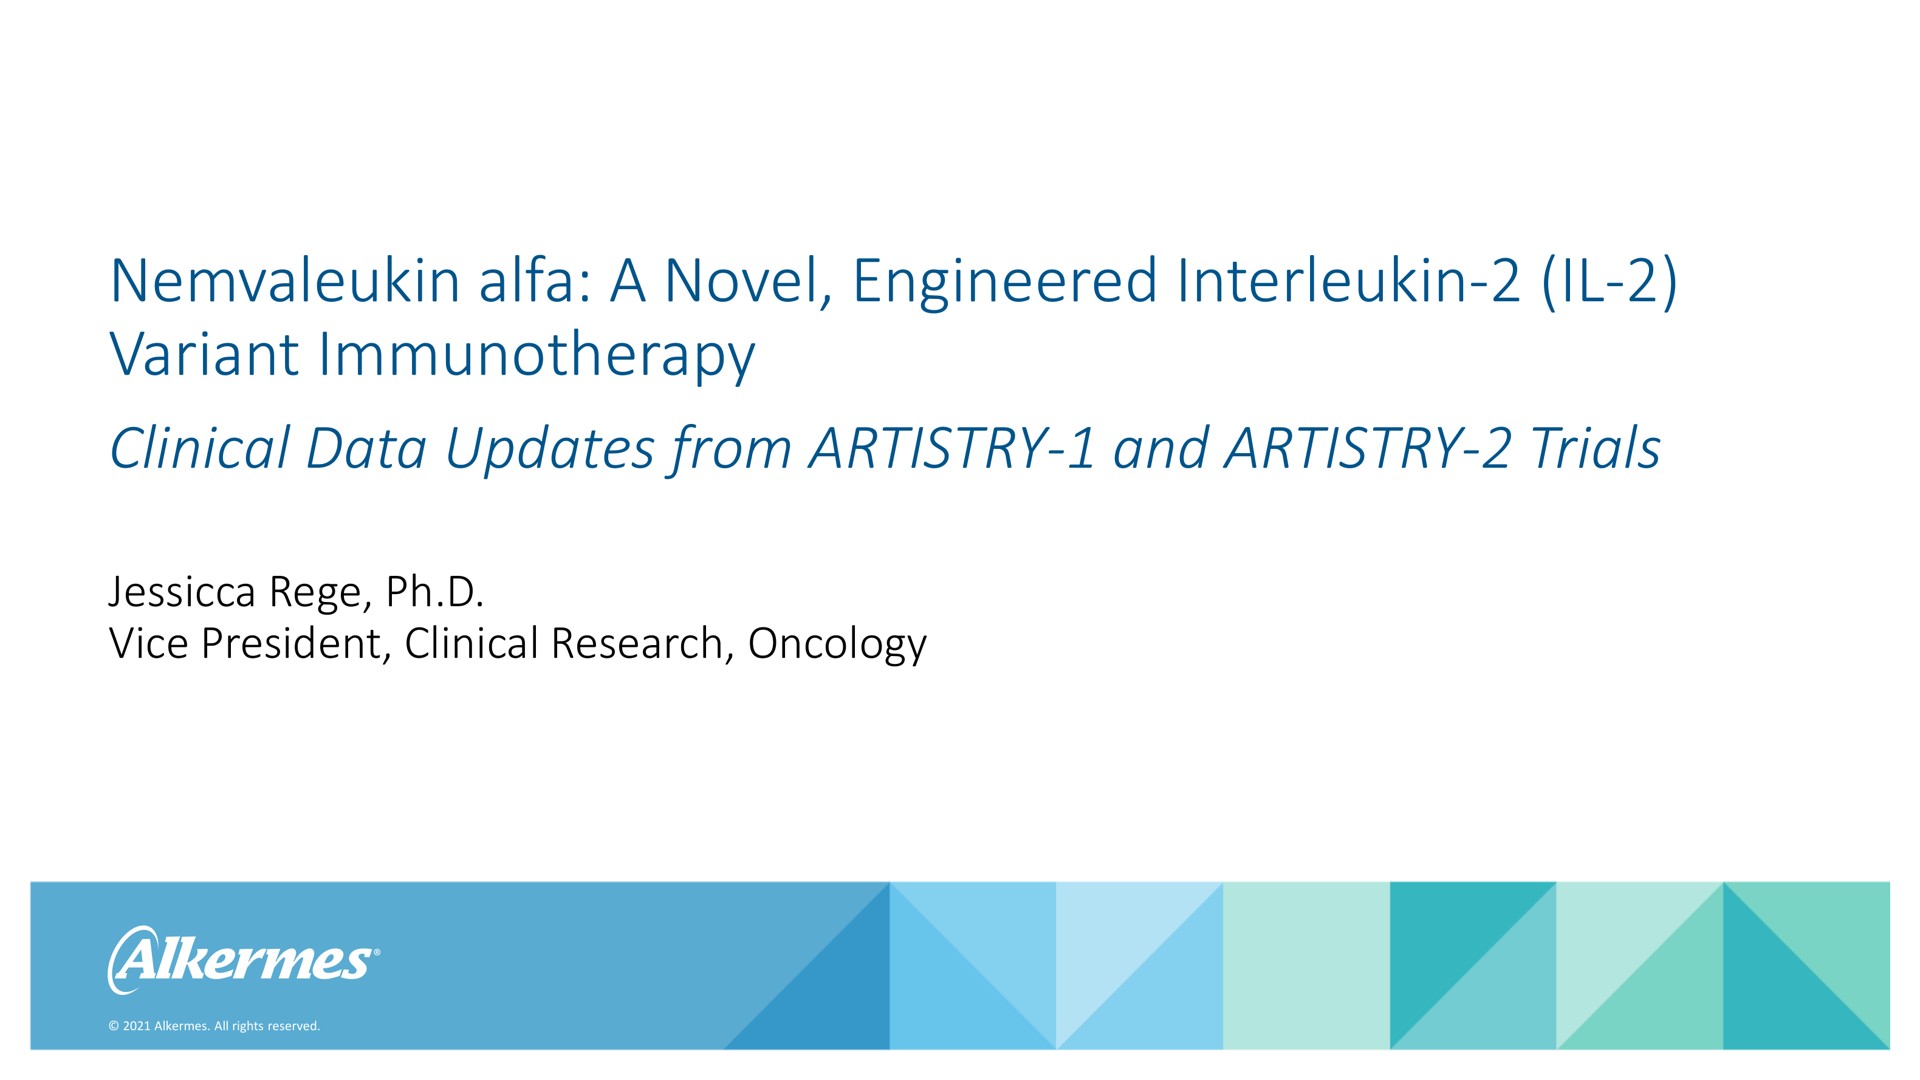 alfa a novel engineered variant clinical data updates from artistry and artistry trials vice president clinical research oncology a | Alkermes